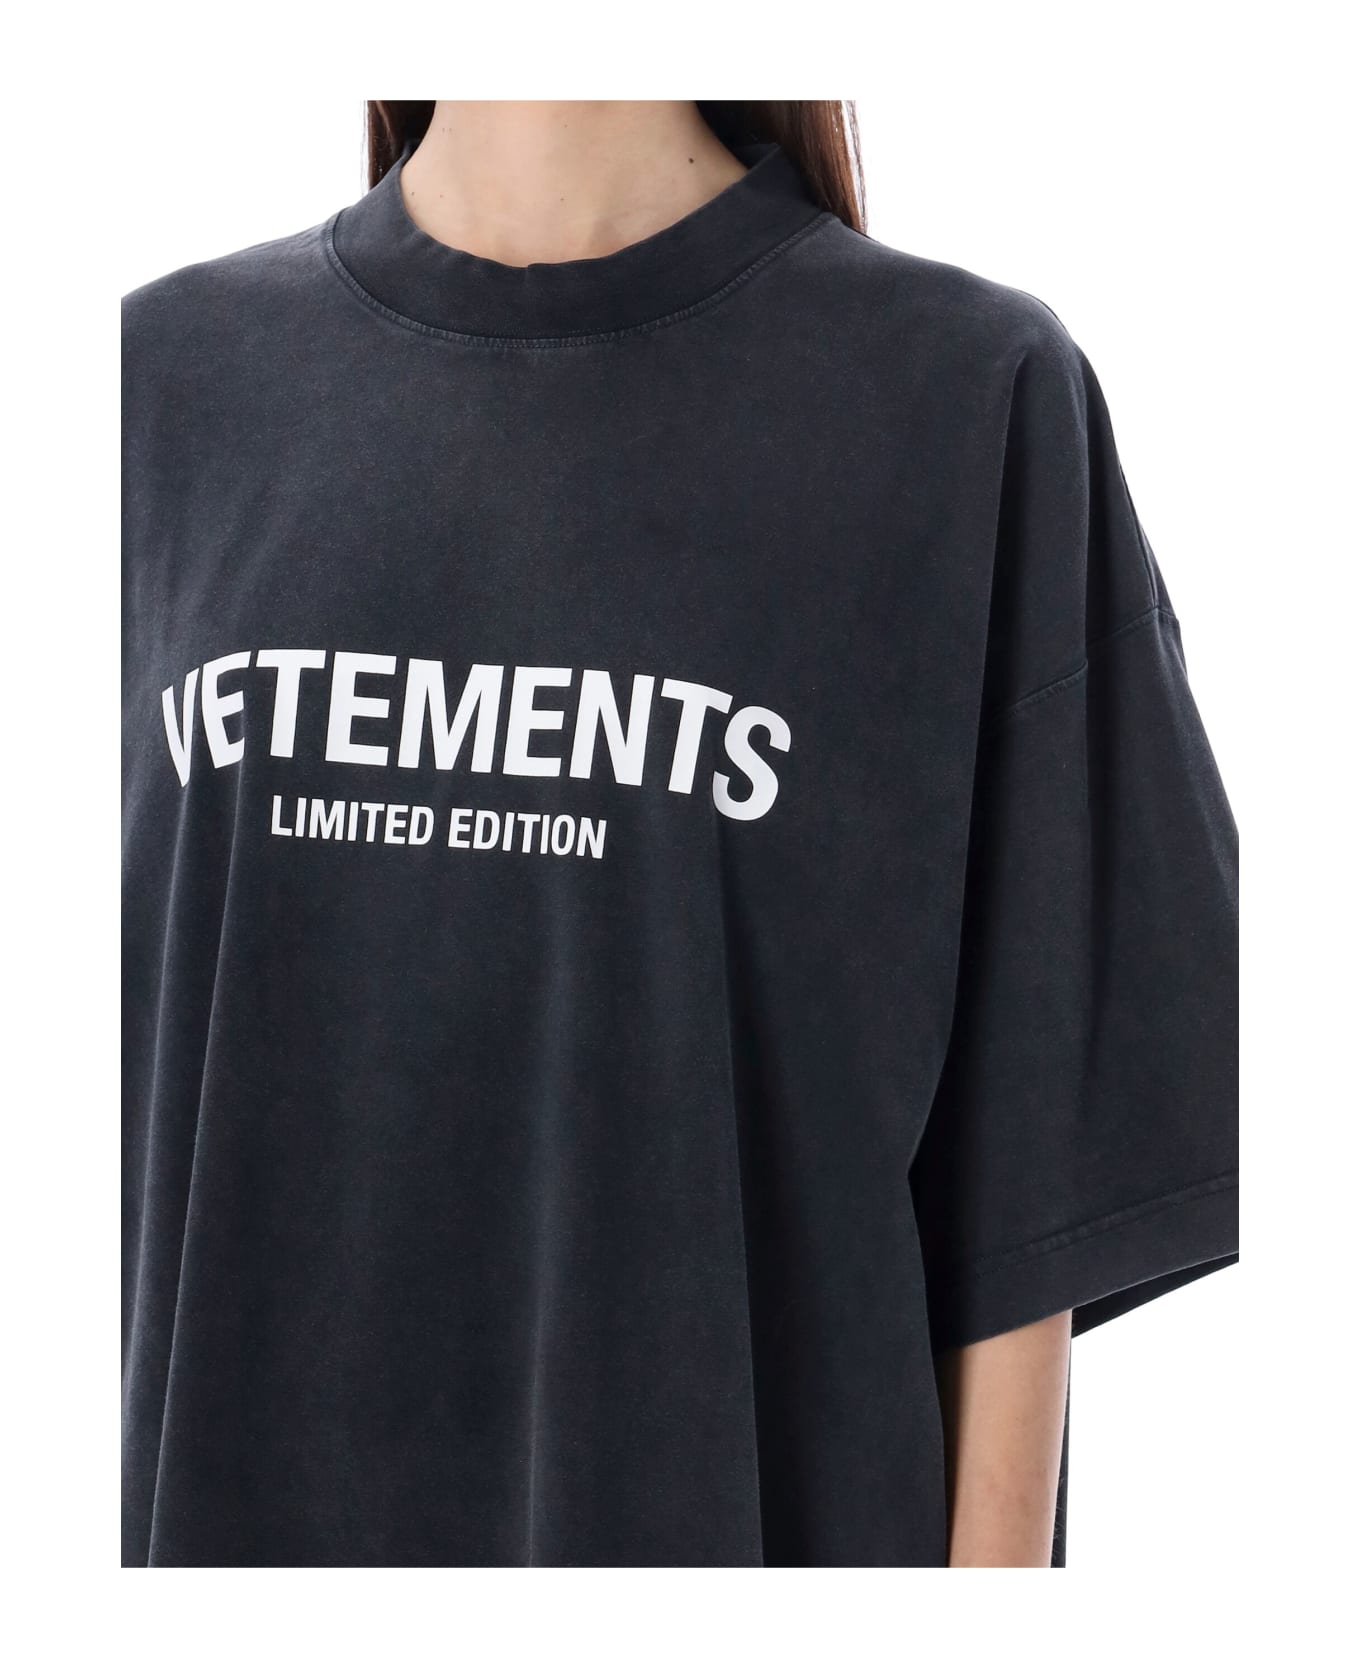 VETEMENTS Logo Limited Edition T-shirt - WASHED BLACK